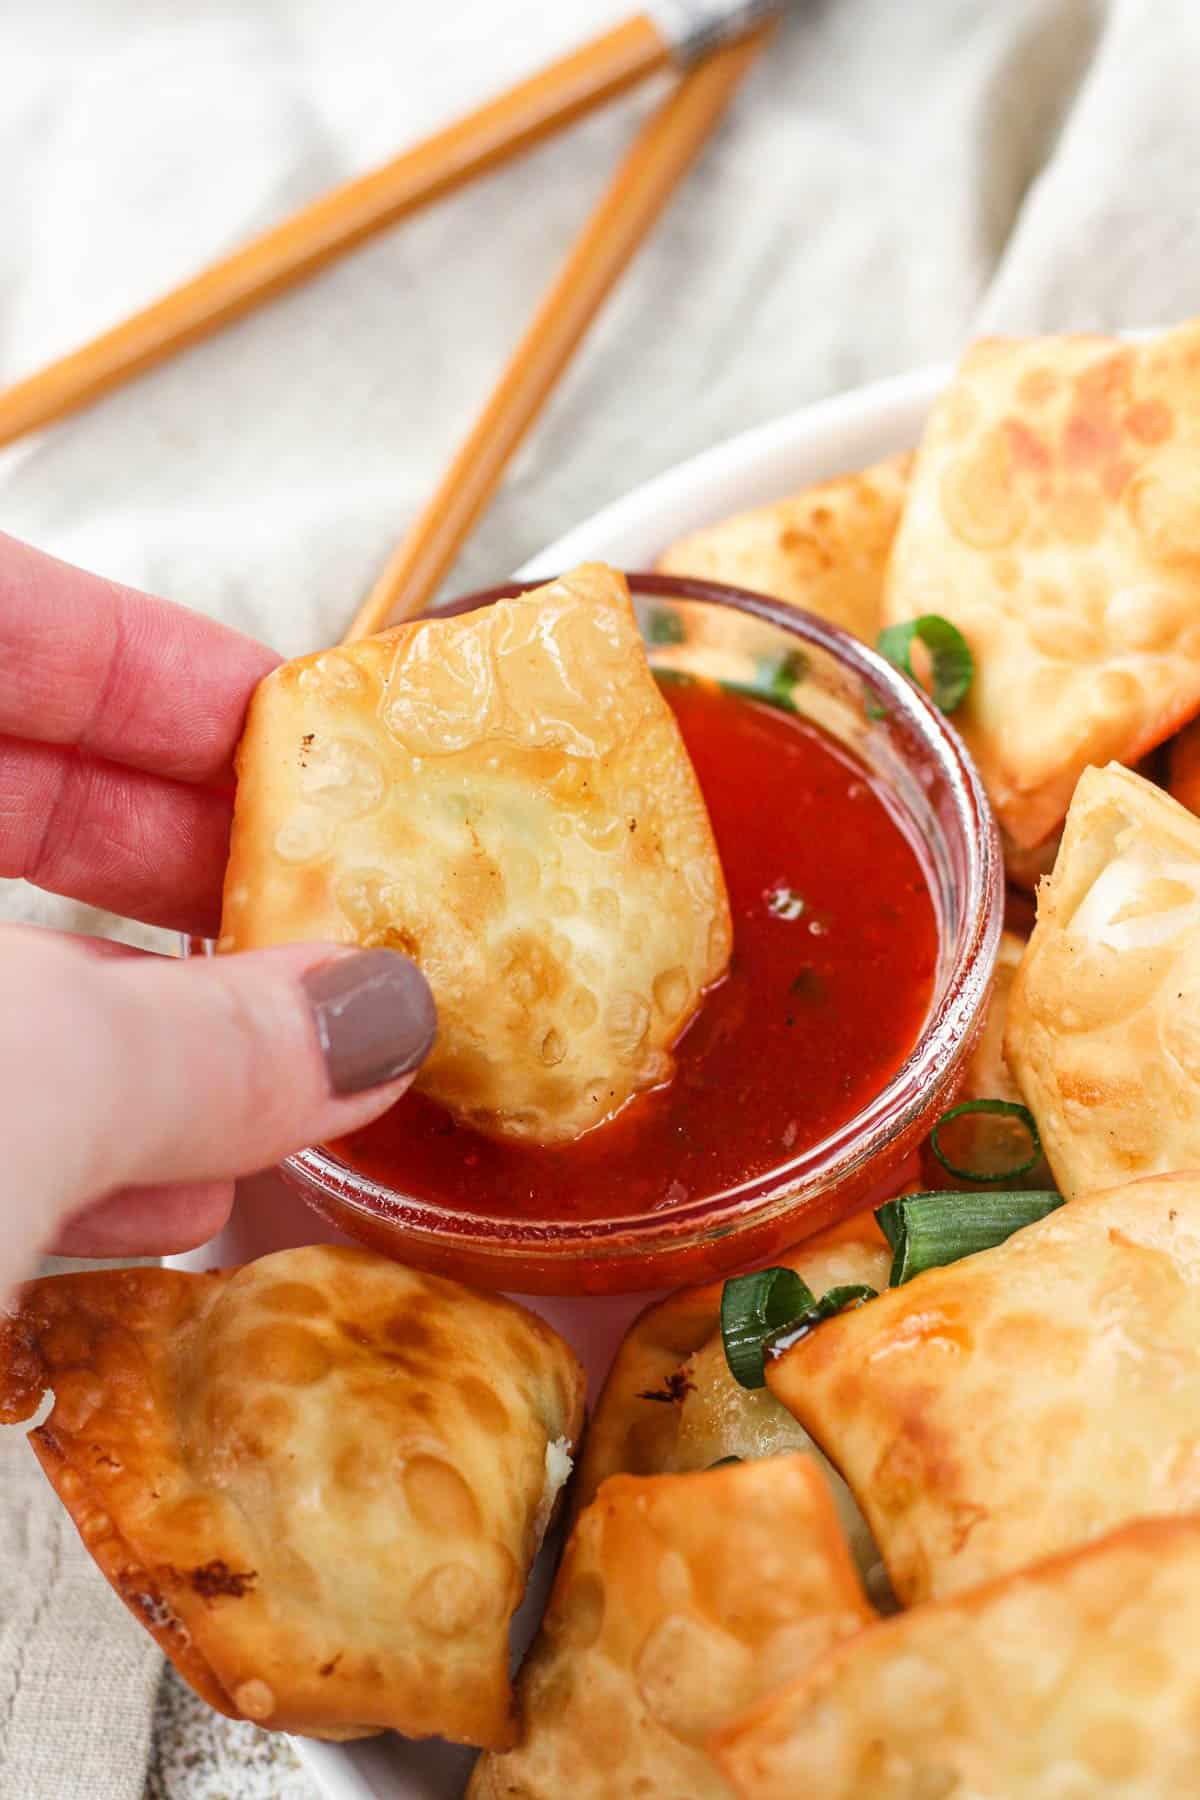 Hand picking up a crab rangoon and about to dip into the red sauce. 